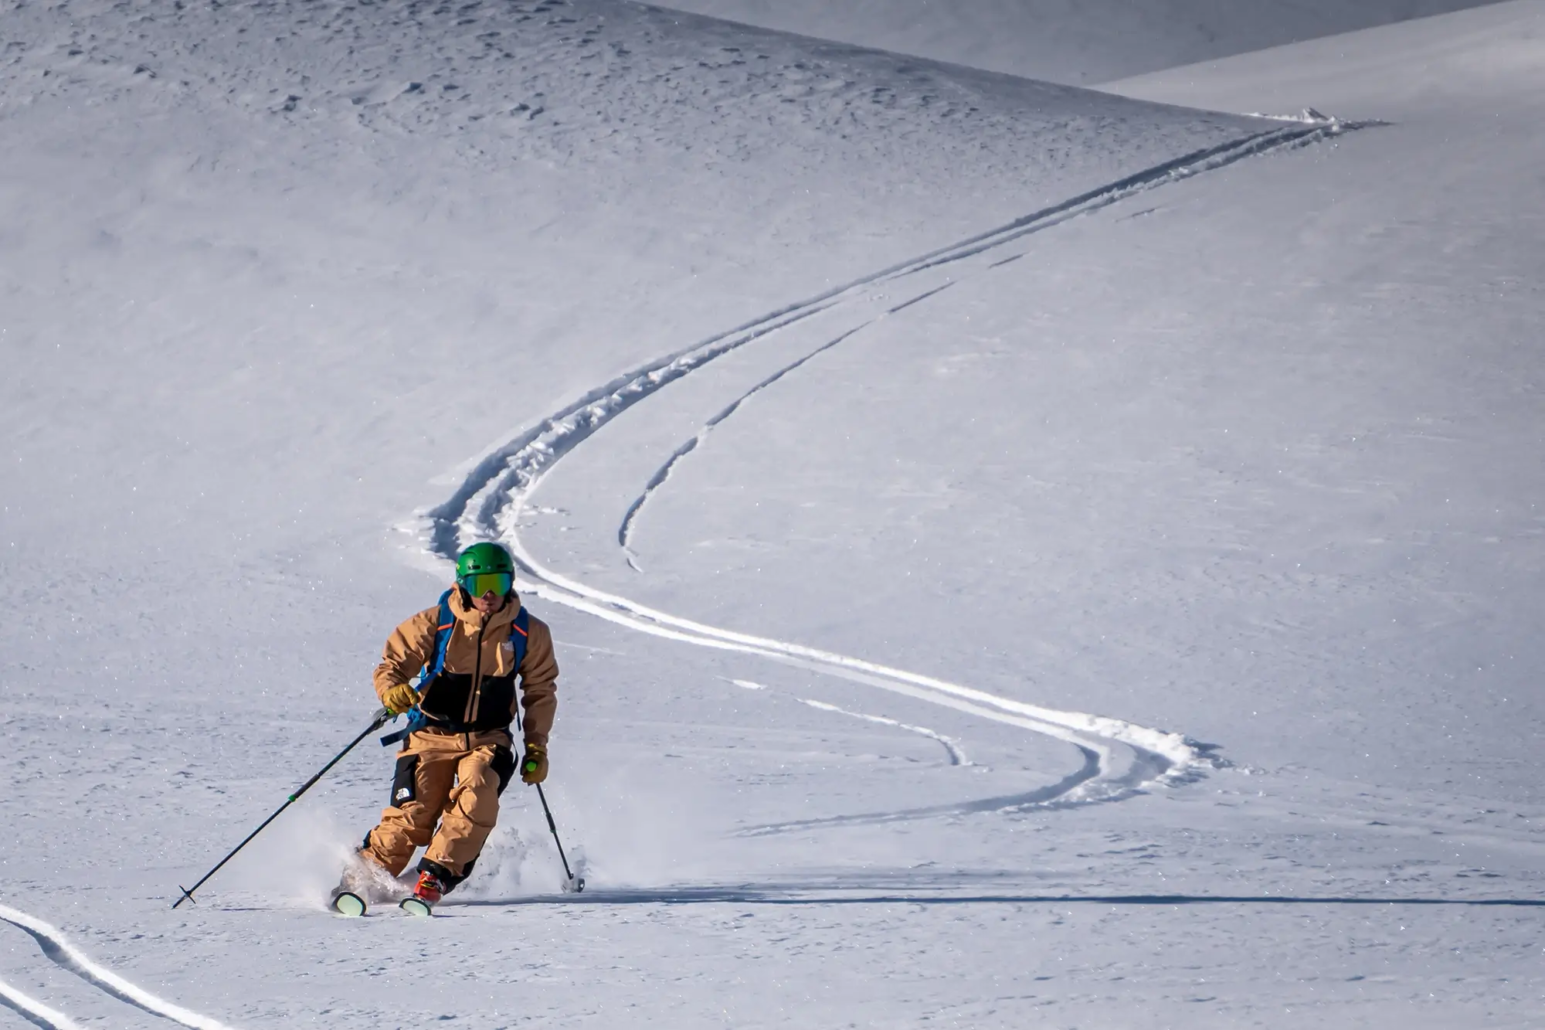 Skier making turns on untouched snow